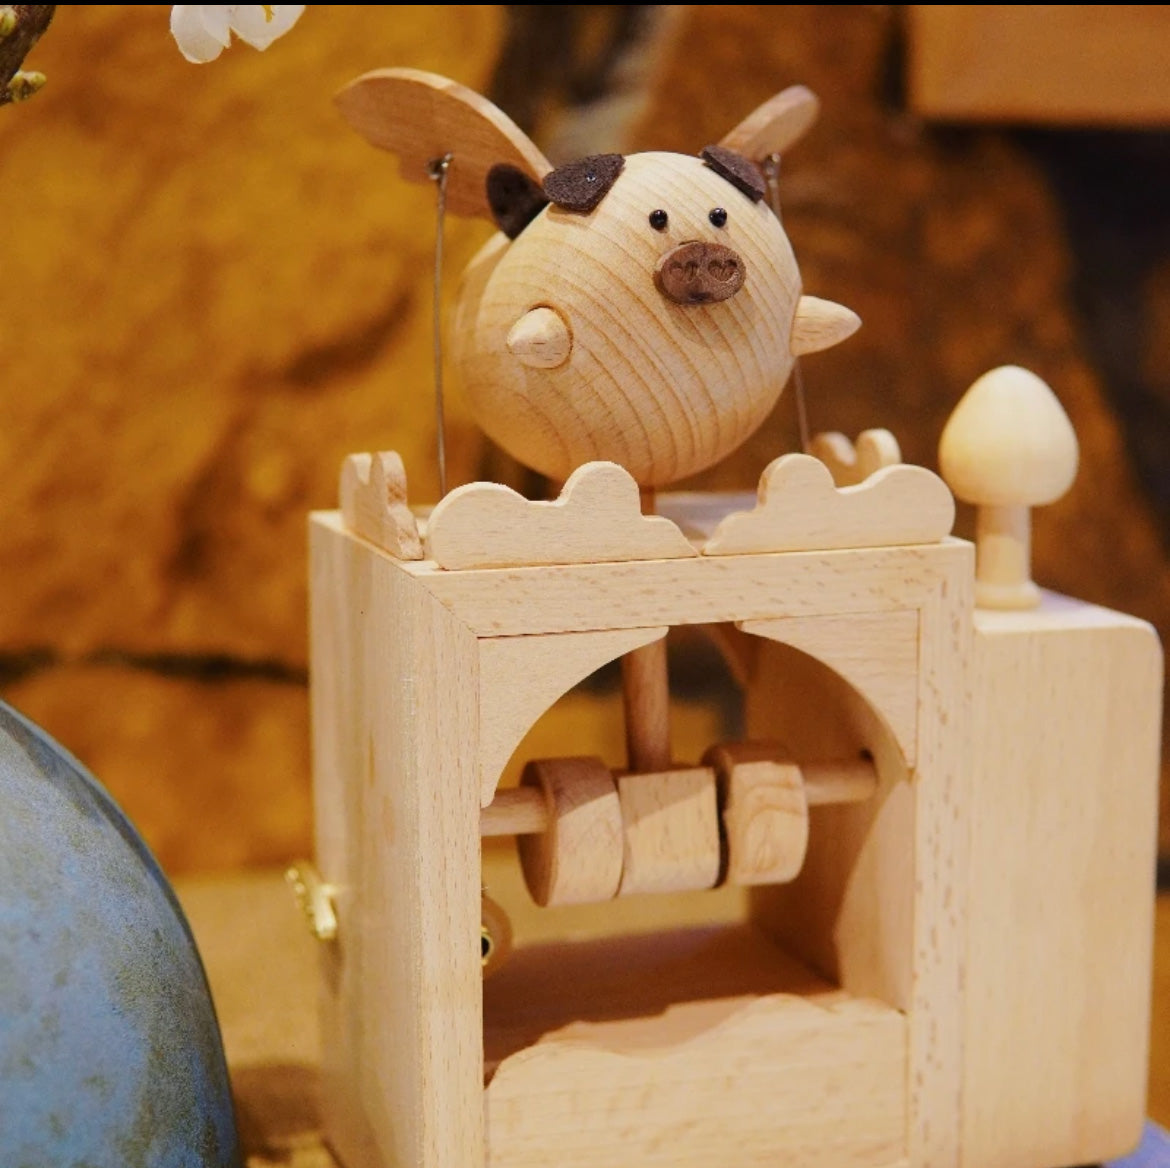 Flying Pig Wooden Music Box - Mike Uncle